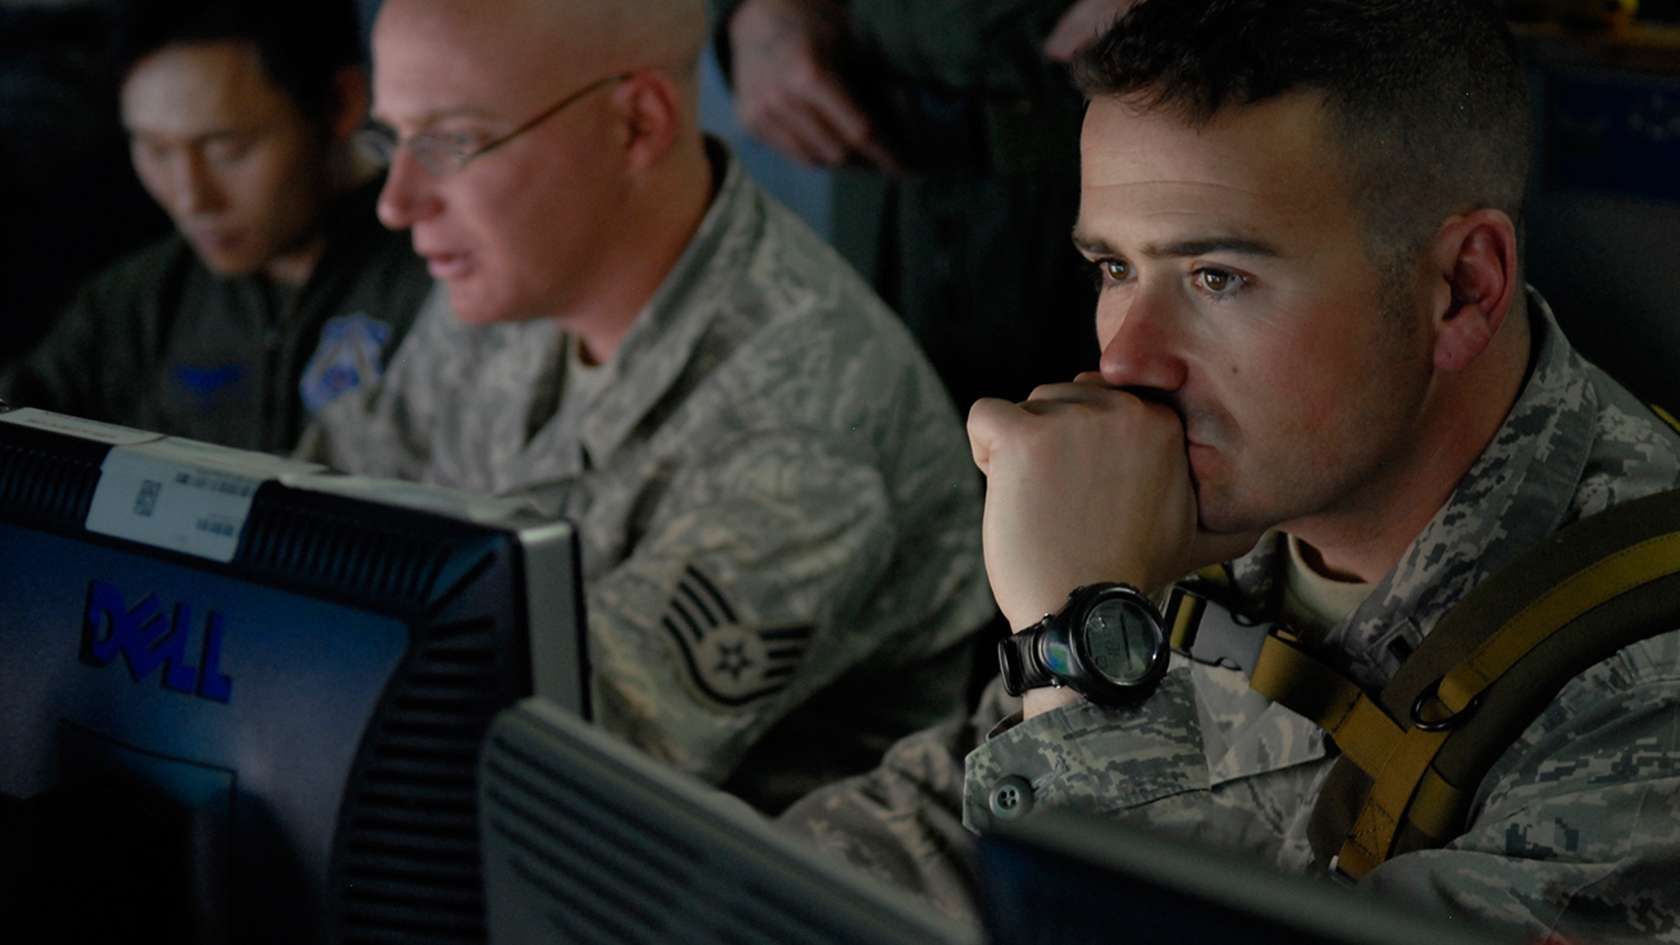 Air Force staff working with computers